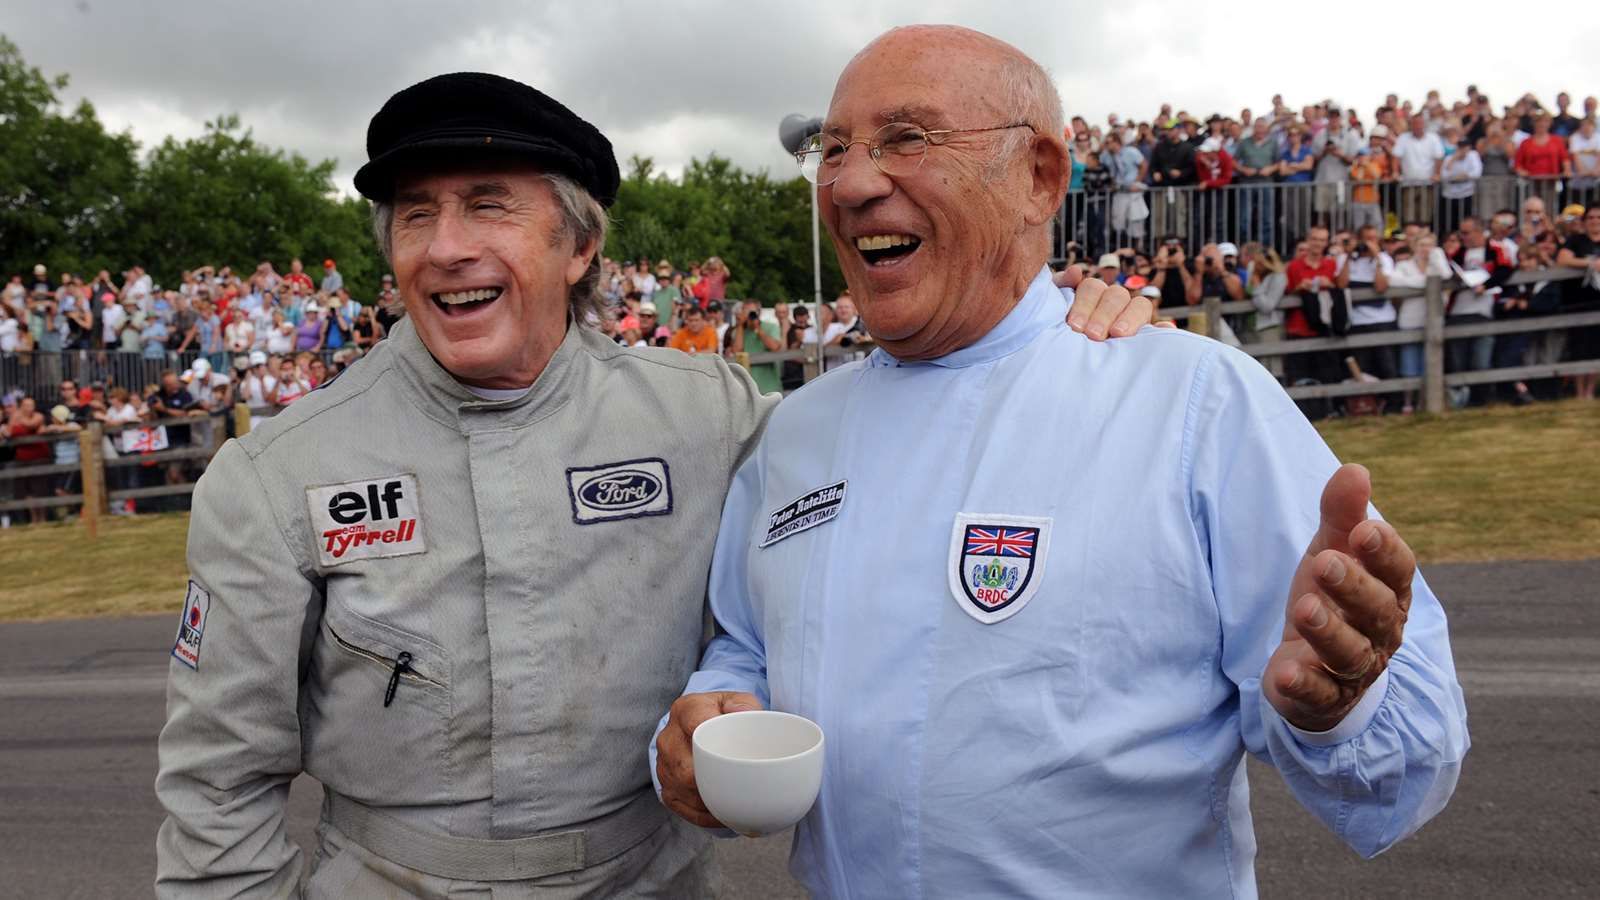 Sir Stirling Moss and Sir Jackie Stewart Goodwood